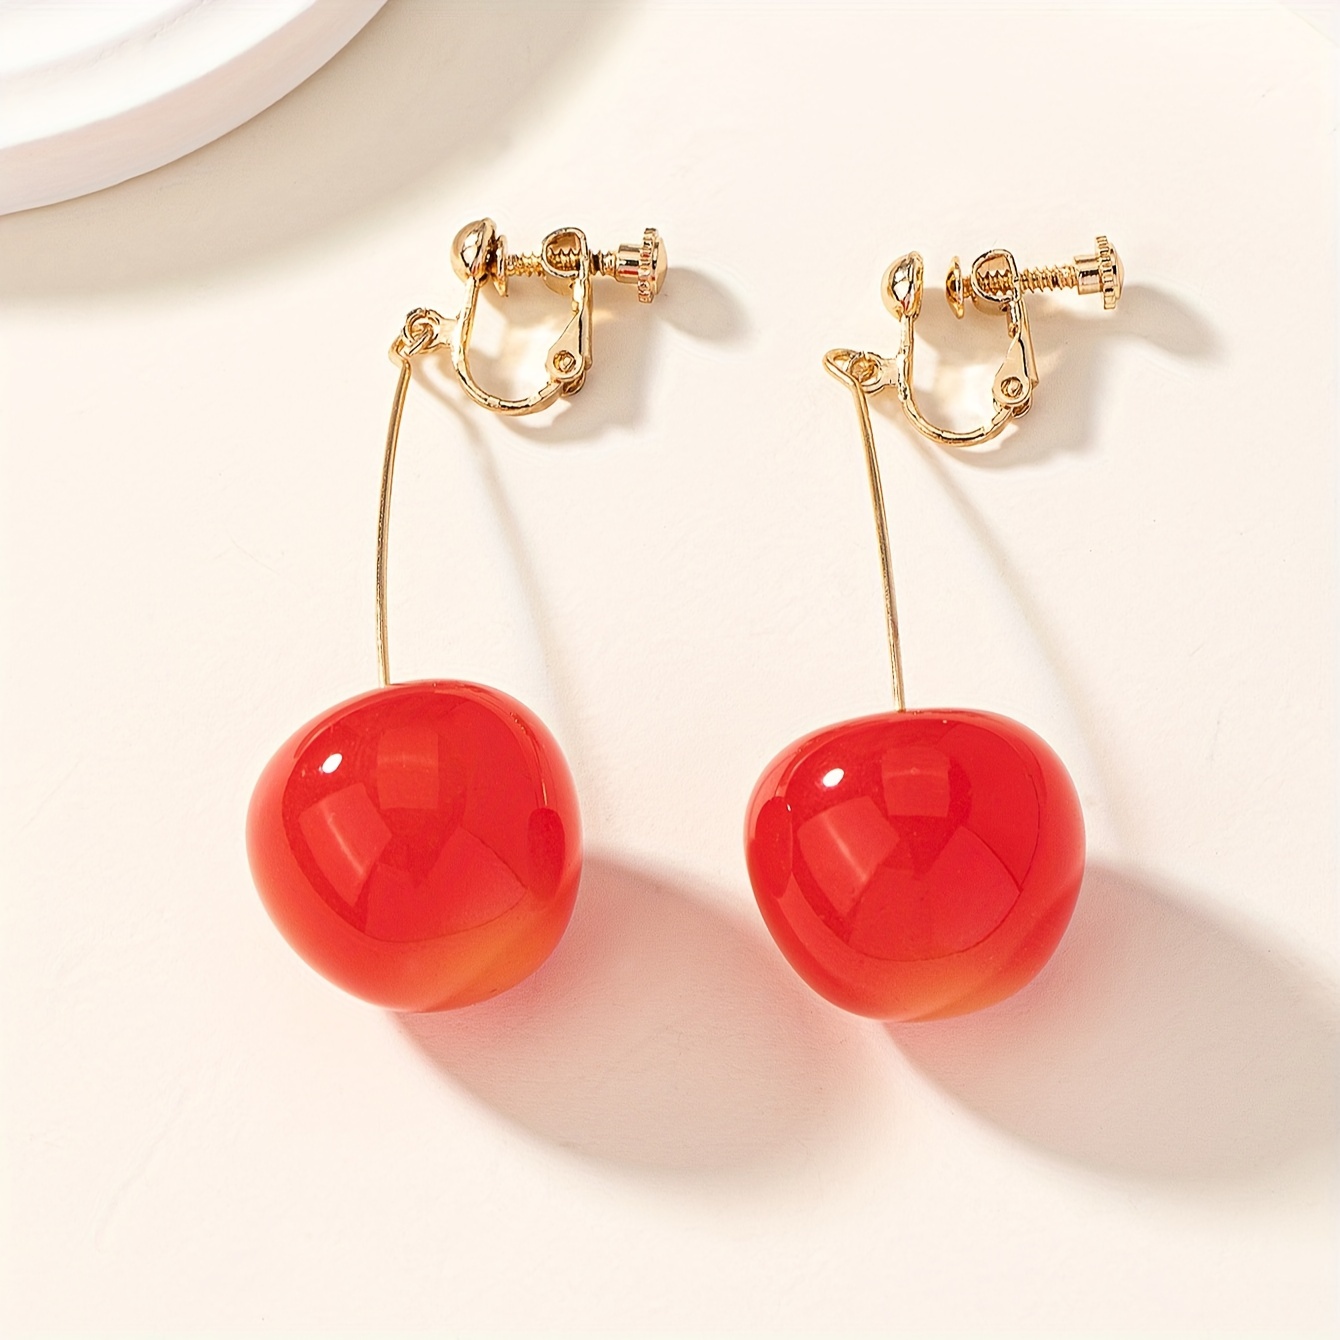 

Exquisite Cherry Design Clip On Earrings Elegant Pastoral Style Suitable For Women Summer Party Earrings